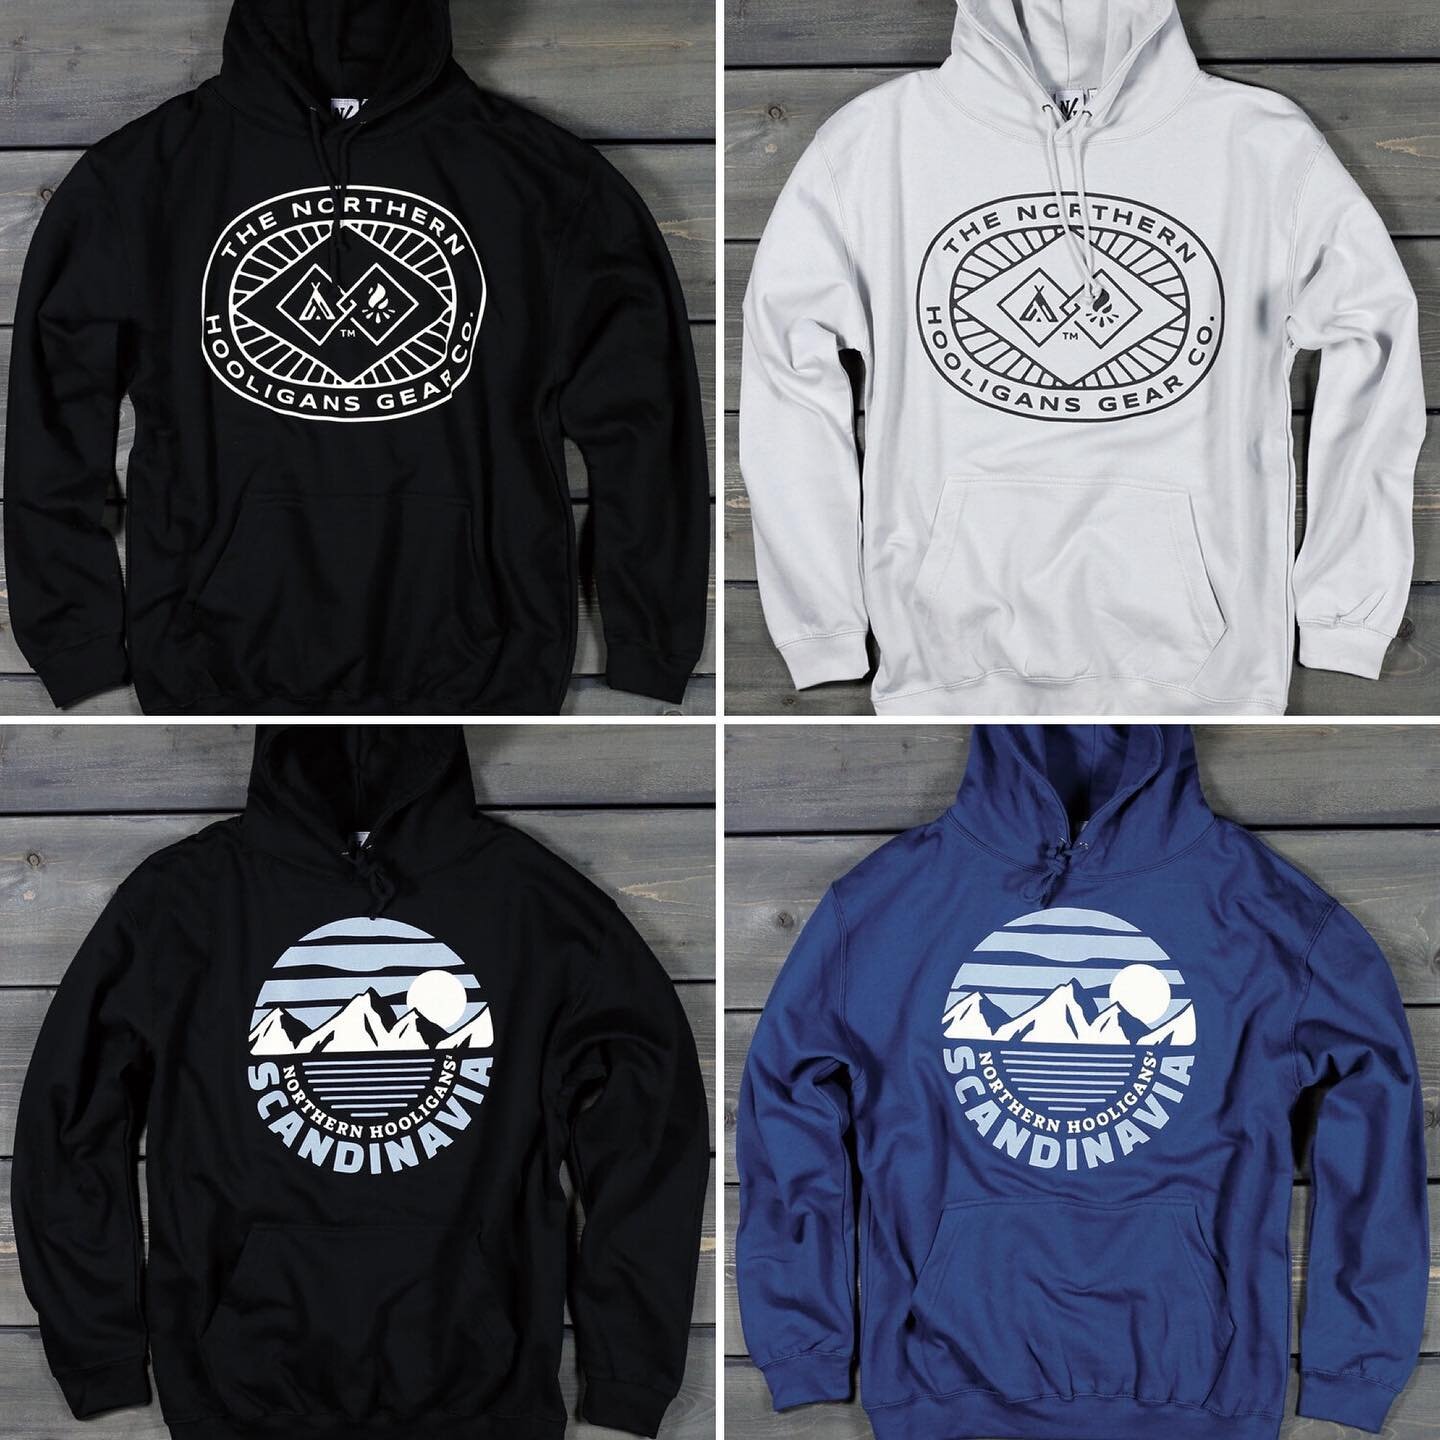 New arrivals in the webshop! Our new collection of hoodies part I. @northernhooligans